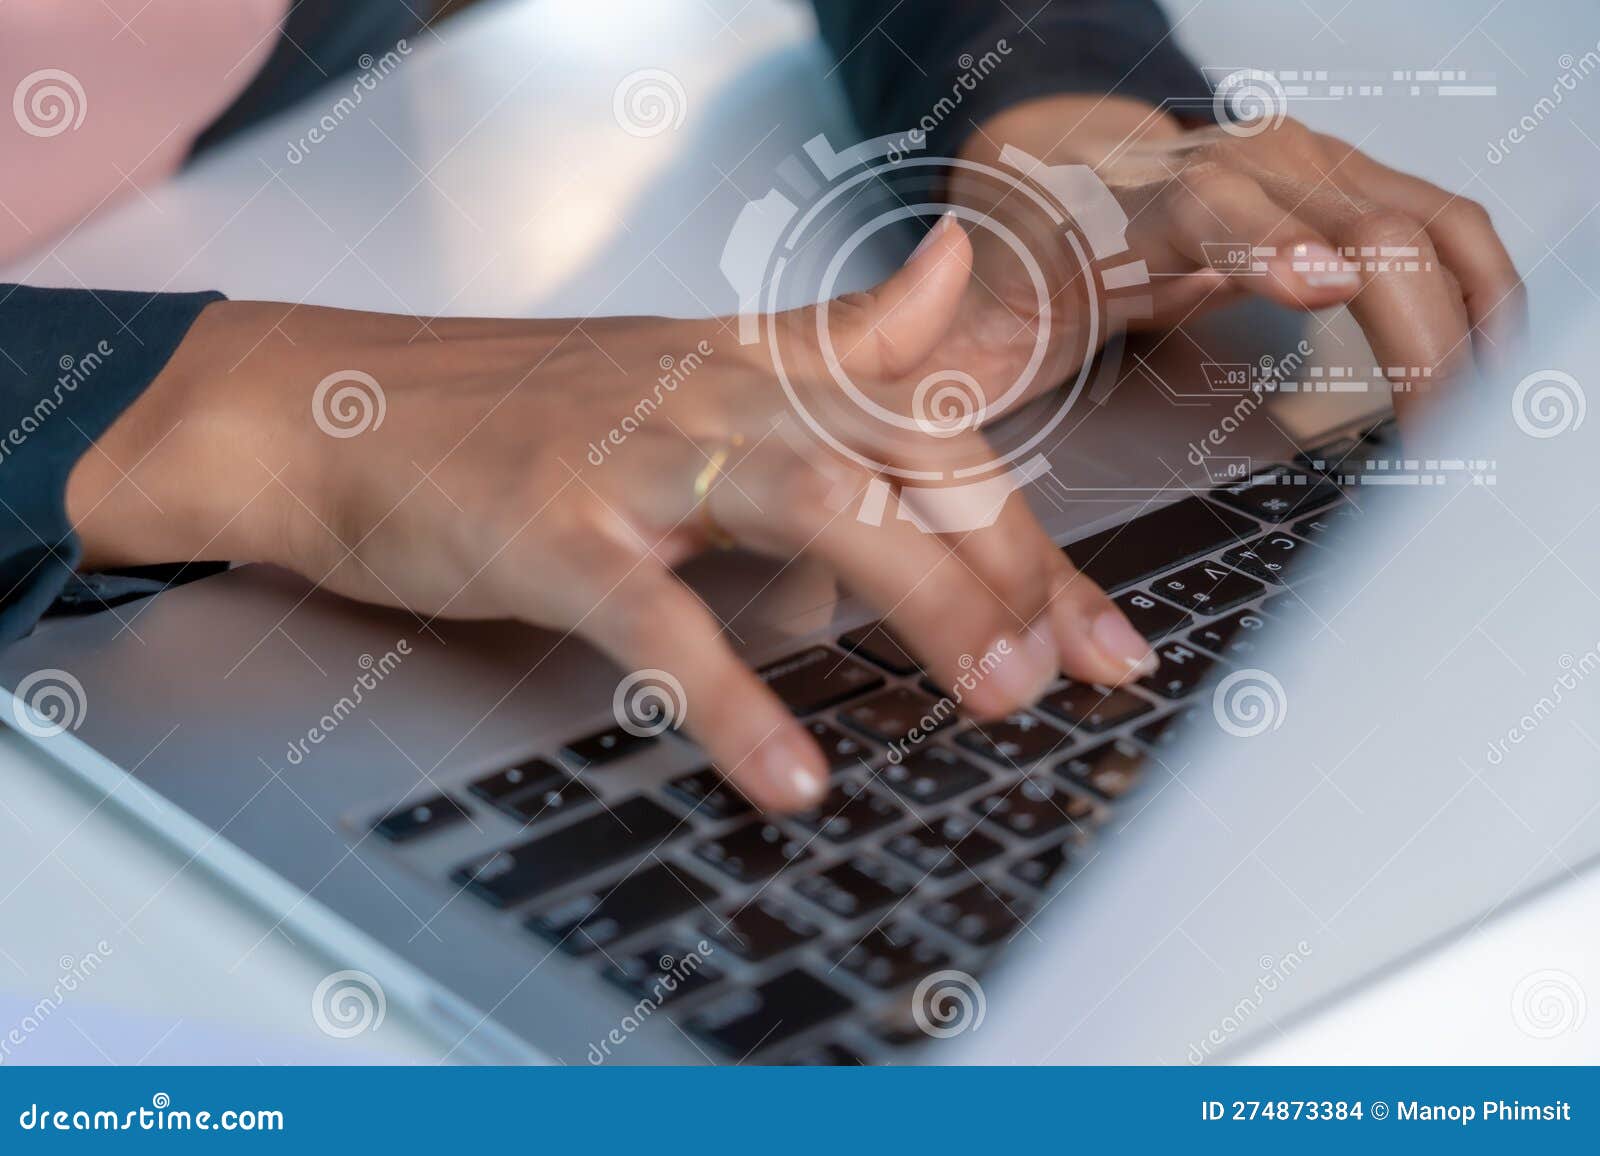 hands typing on keybord